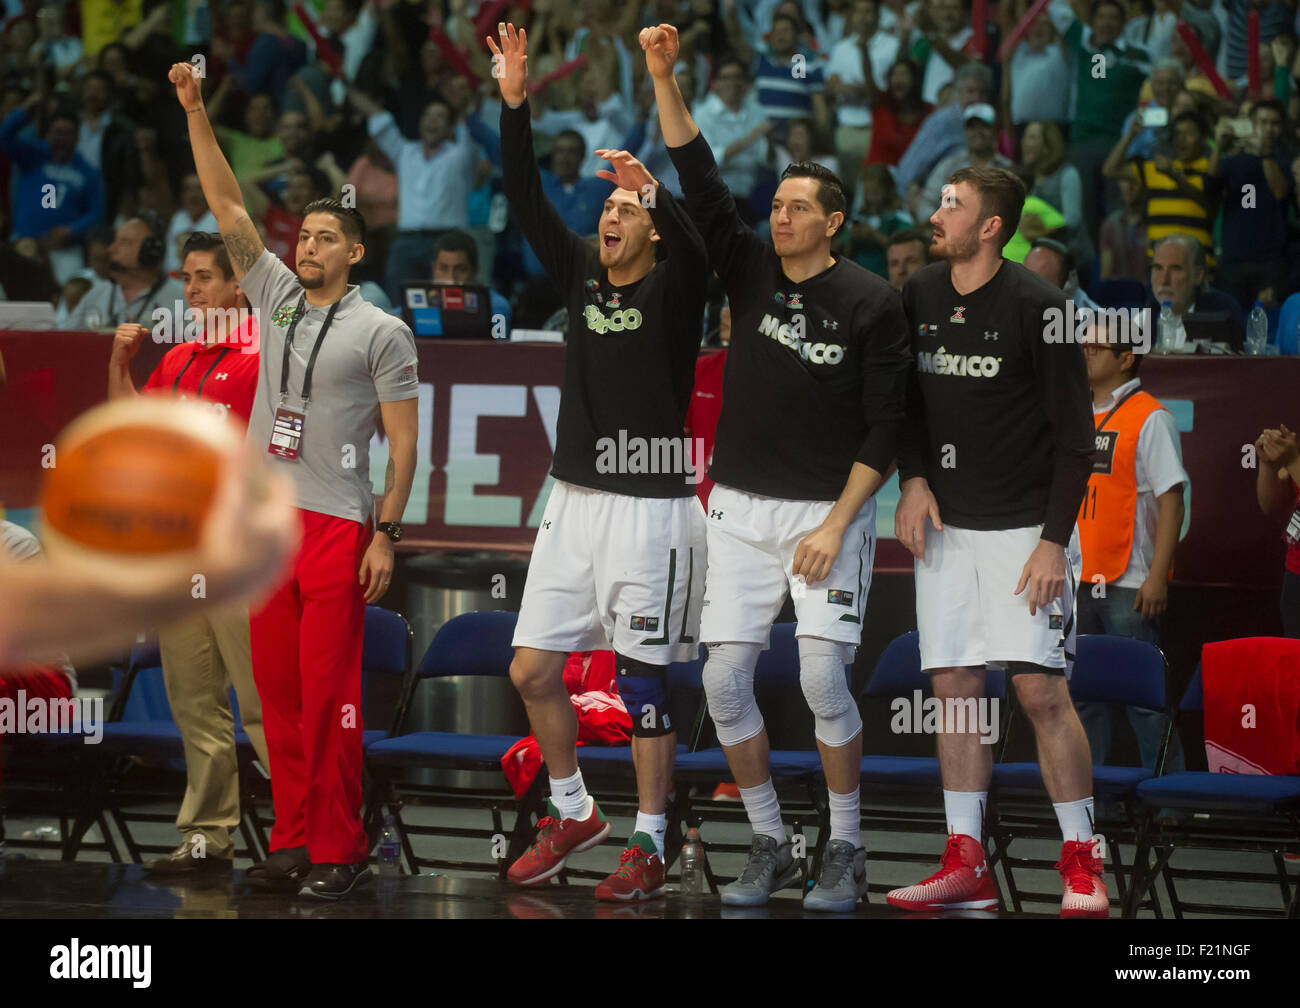 Mexico City, Mexico. 9th Sep, 2015. Mexico's Paul Stoll (3rd R), Adrian Zamora (2nd R) and Israel Gutierrez (1stR) jubilate during the match of 2015 FIBA America's Championship against Argentina in Mexico City, capital of Mexico, on Sept. 9, 2015. Mexico won 95-83. © Oscar Ramirez/Xinhua/Alamy Live News Stock Photo